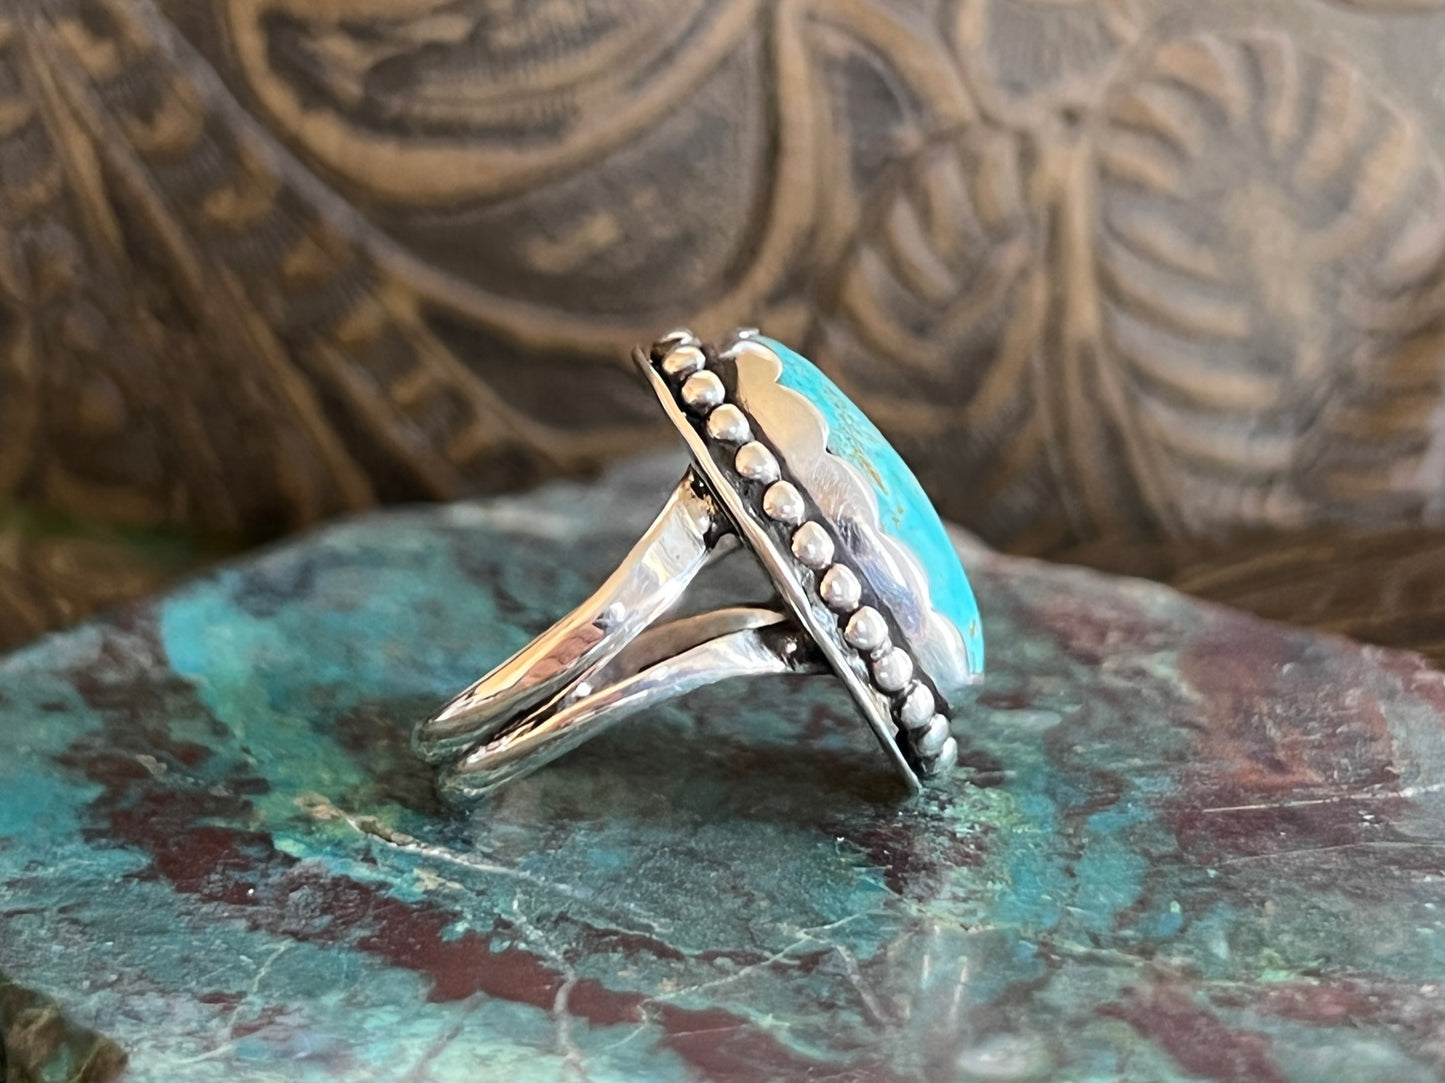 Oval Turquoise Ring